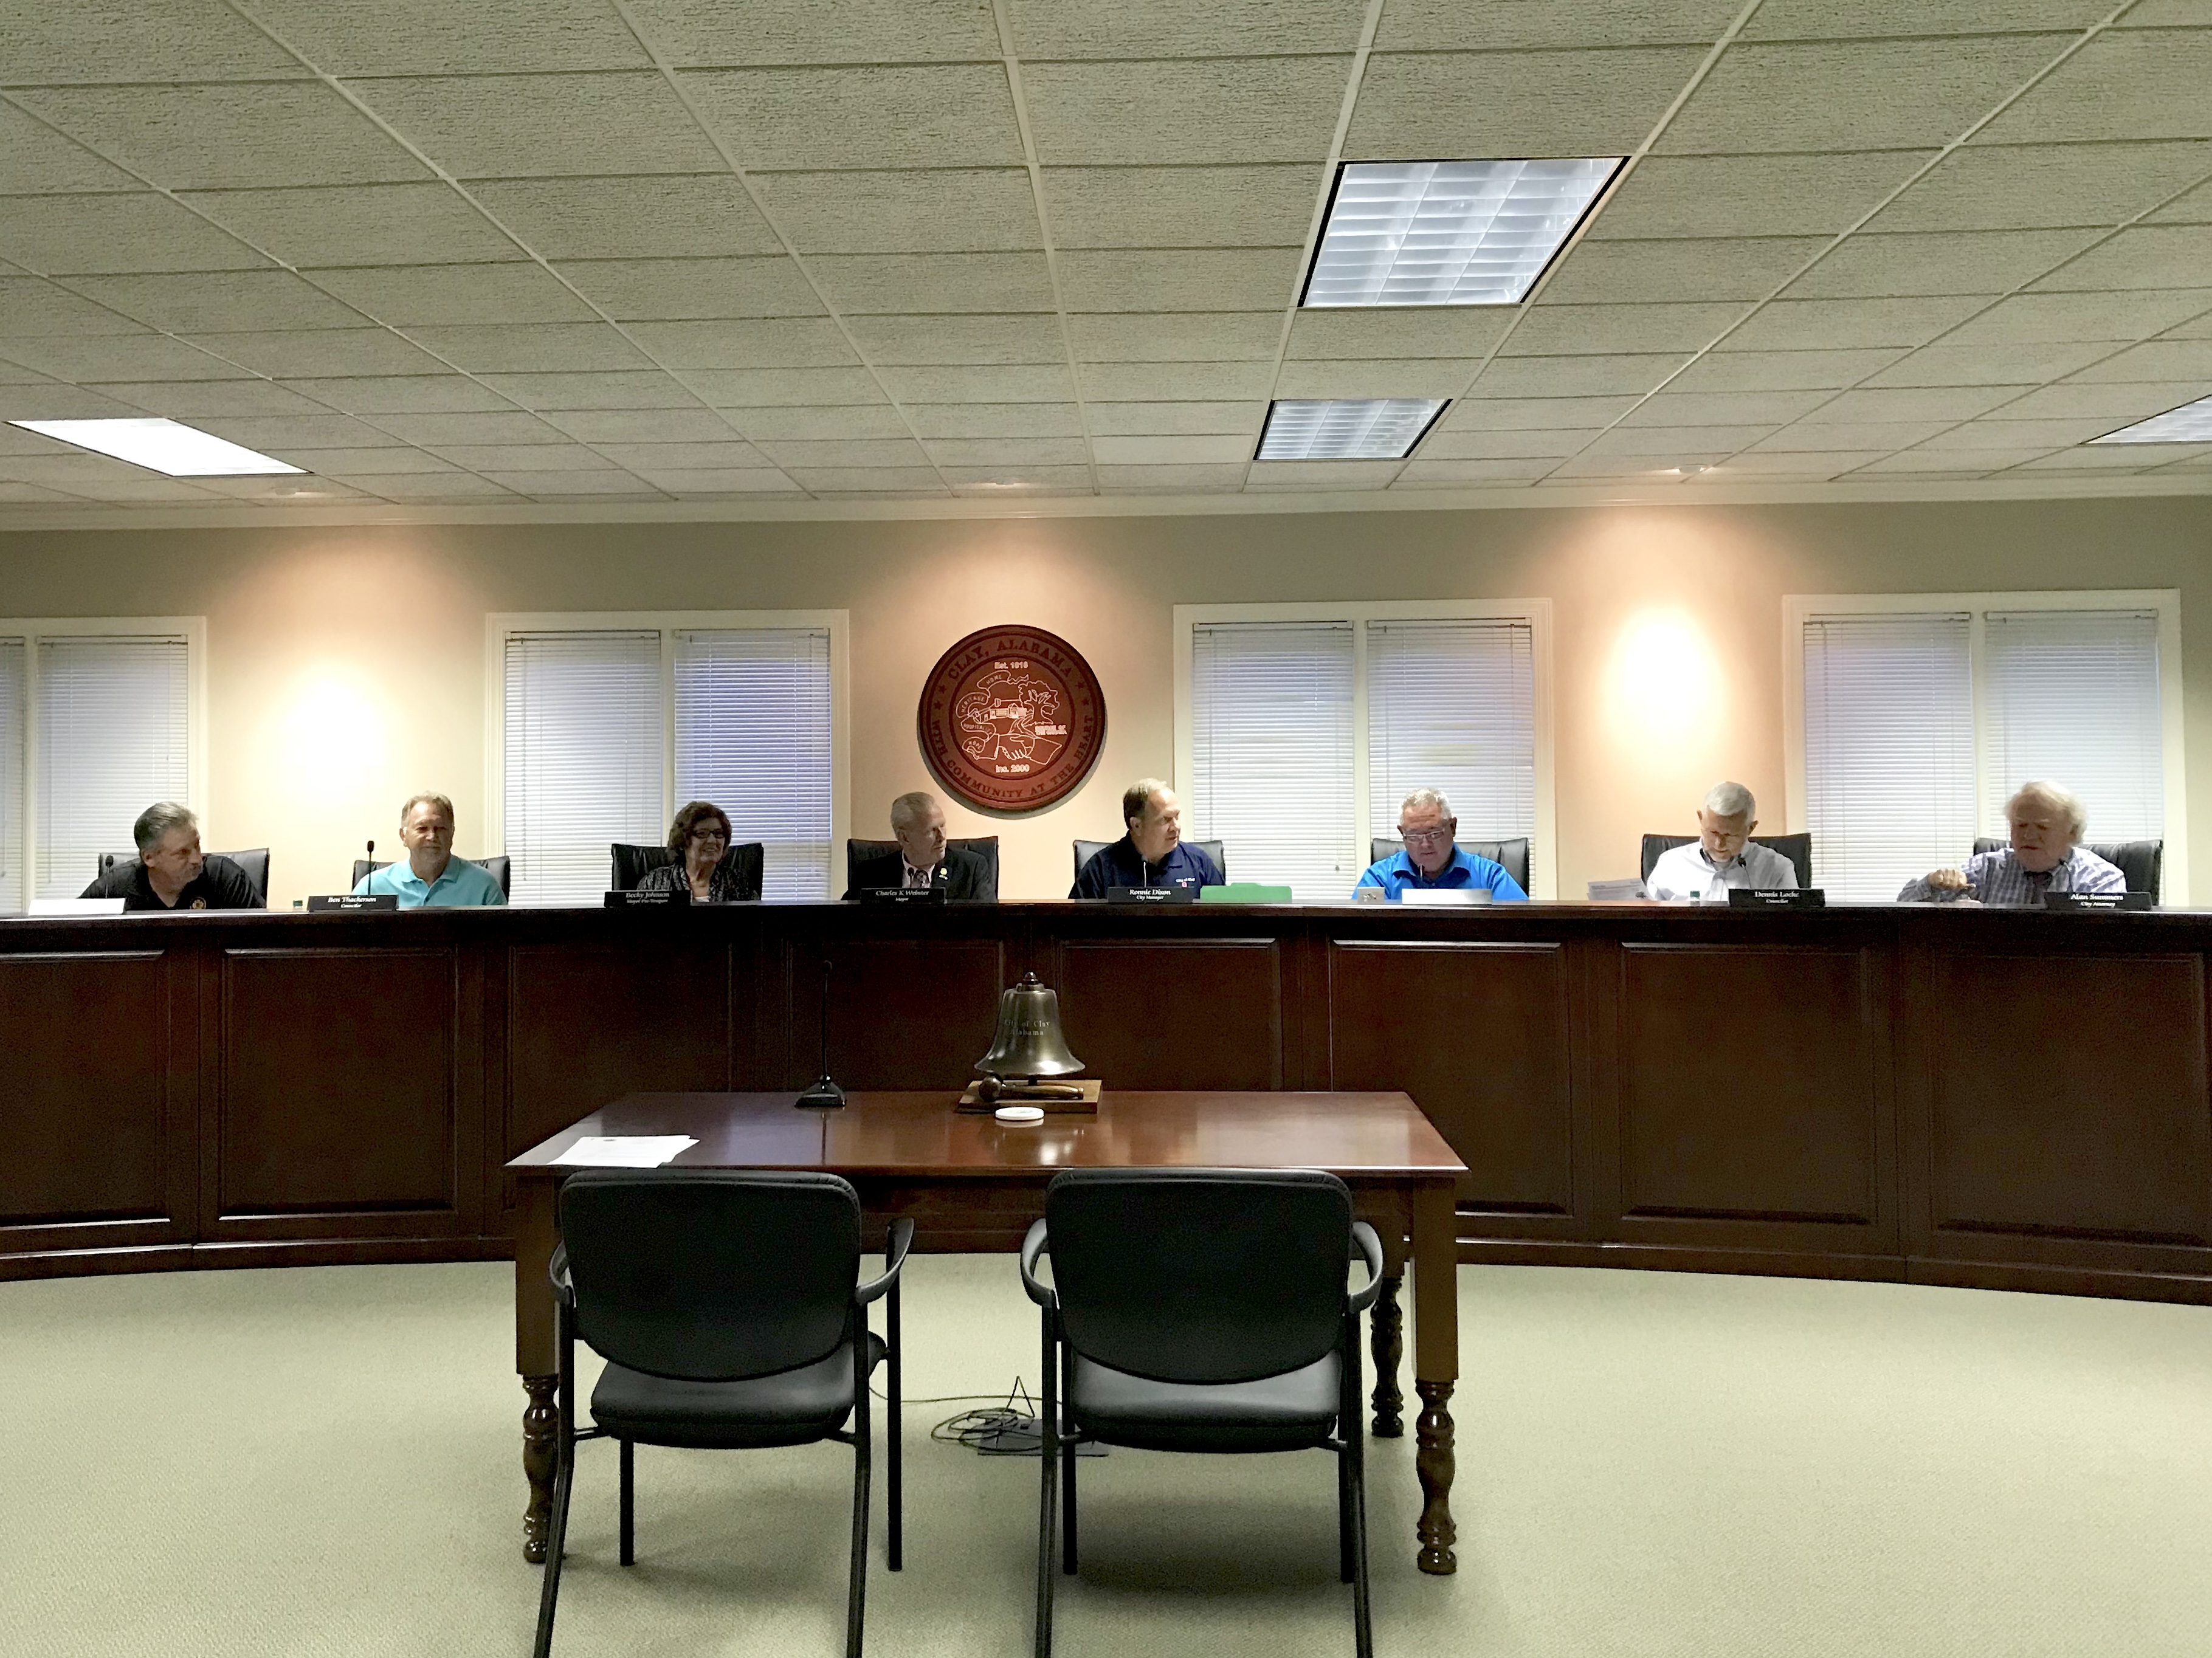 Clay Council will meet on Tuesday, agenda posted